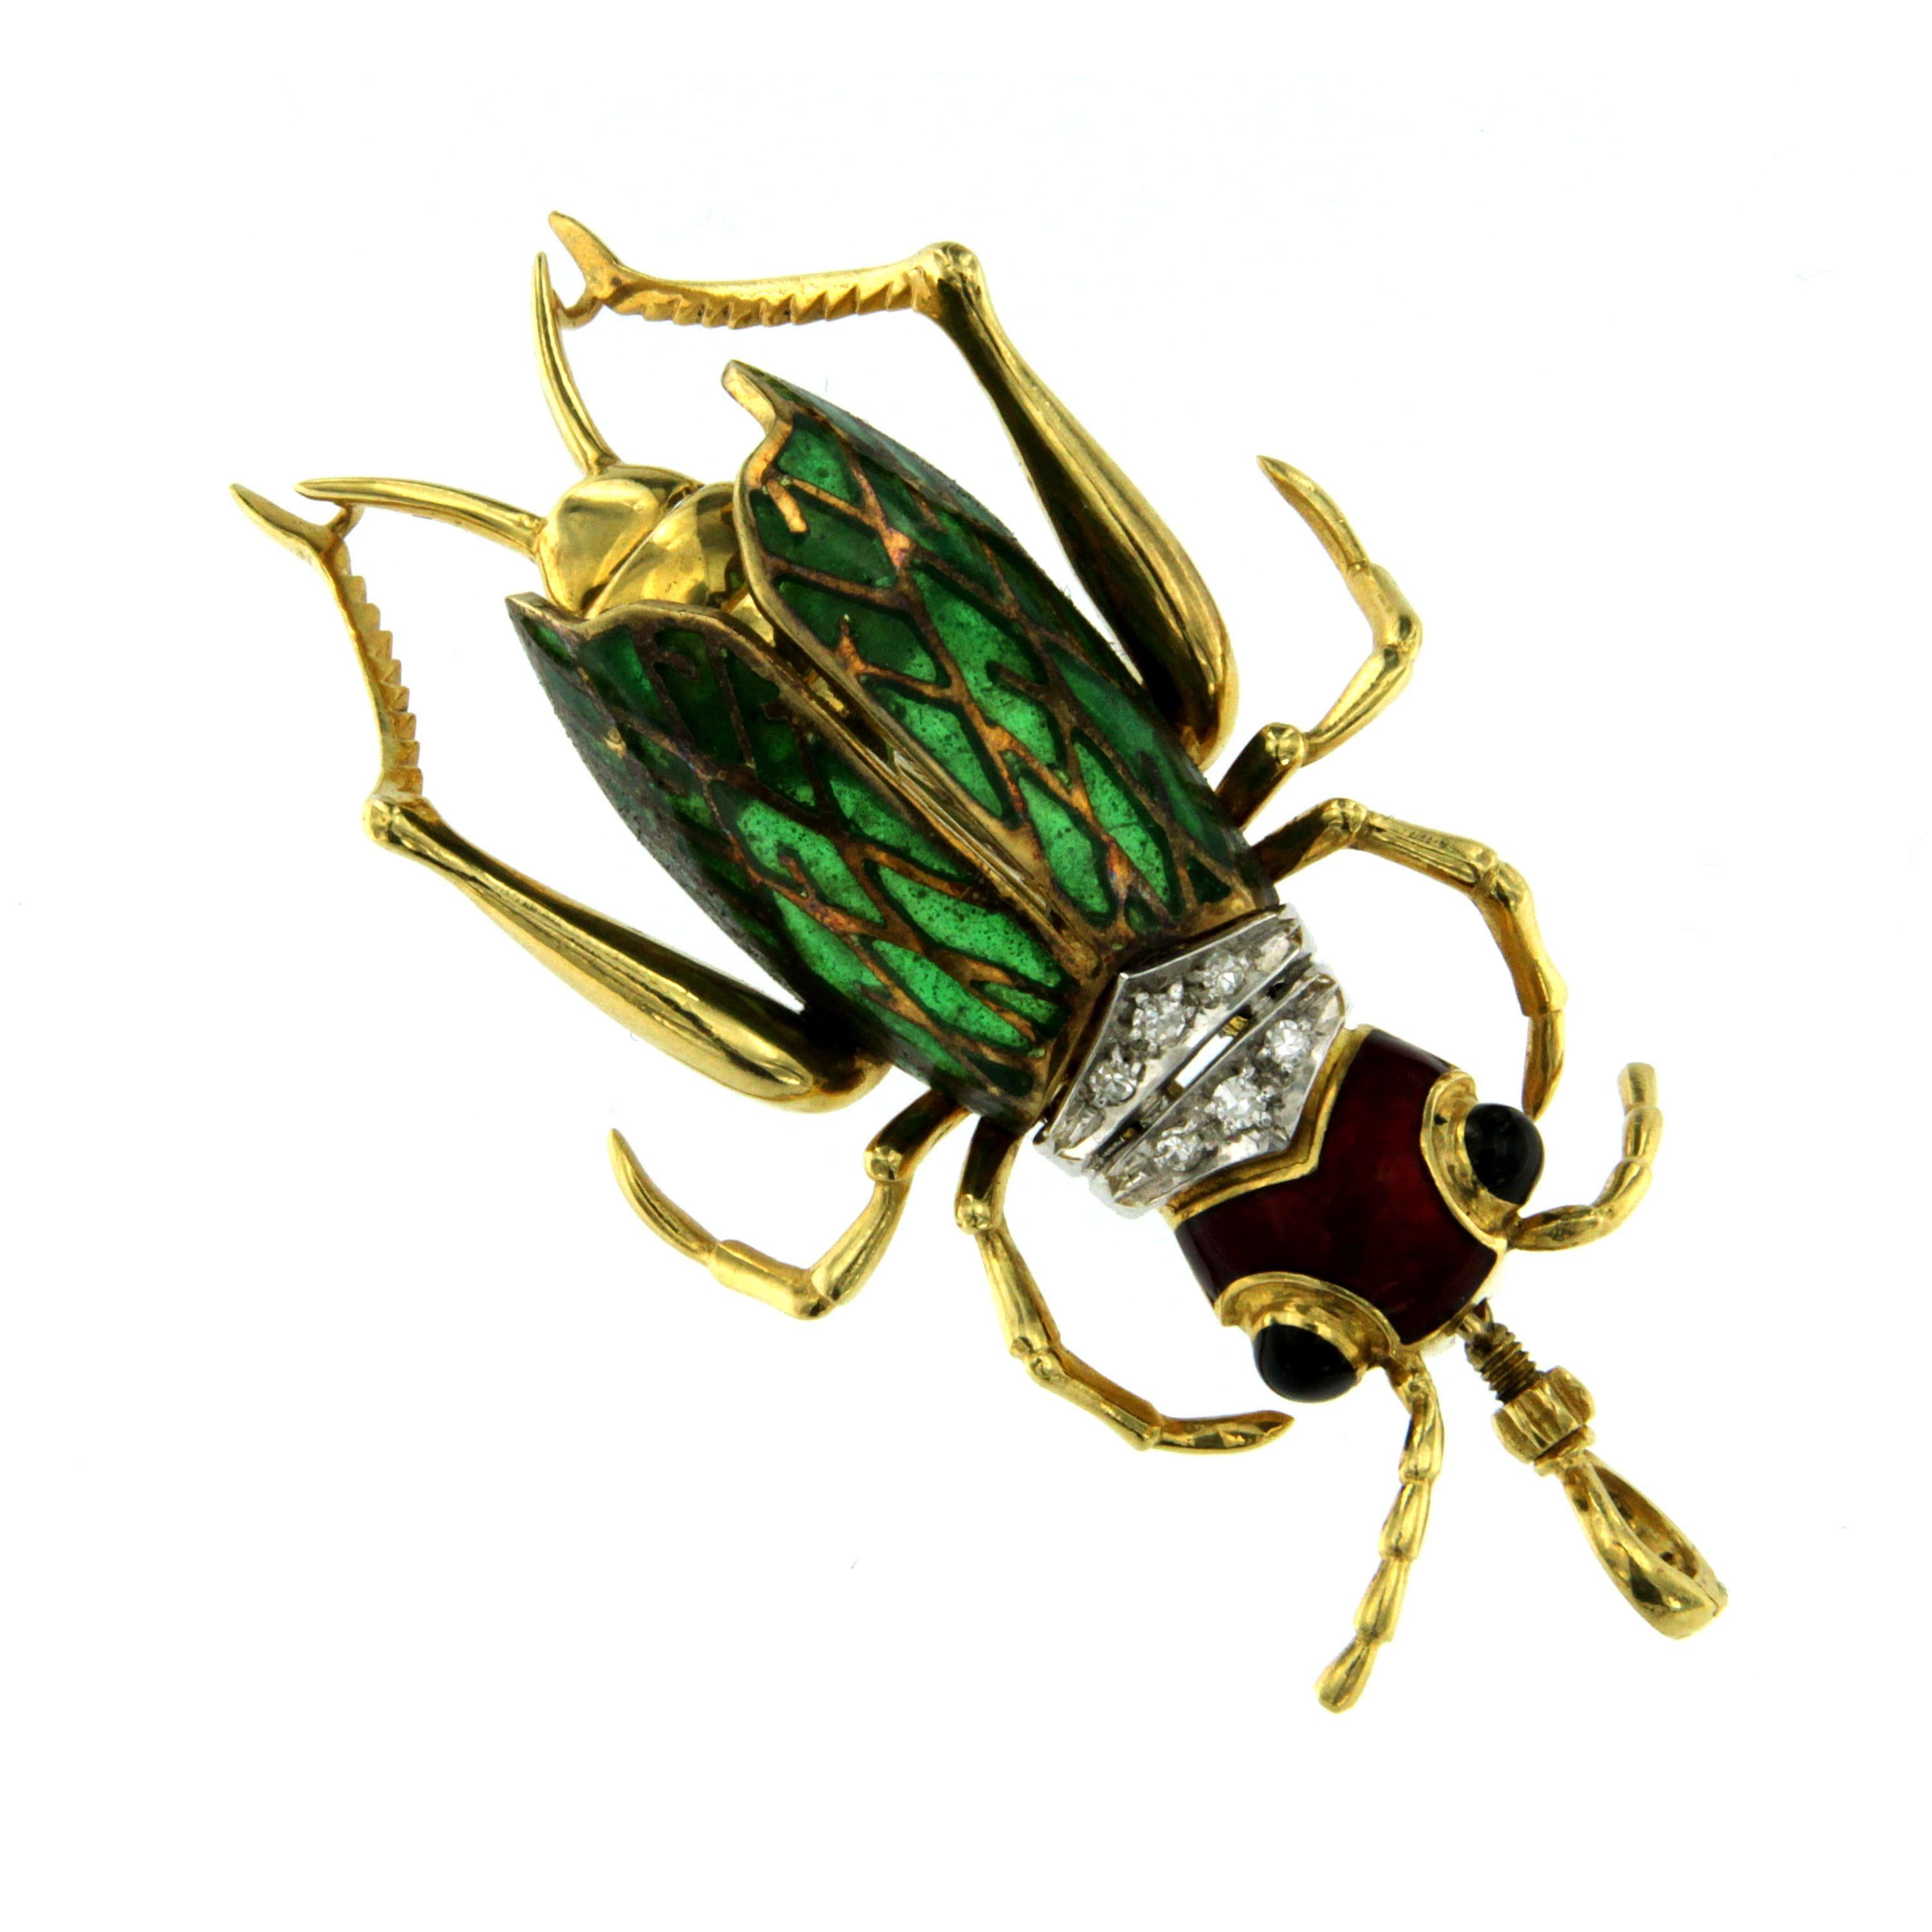 Beautiful Cathedral Enamel Cicada shaped brooch/pendant hand made in of 18k yellow  gold. Set with round cut Colorless diamonds.
Beautiful piece of jewelry, to wear or to collect, origin Italy, Circa 1950

CONDITION: Pre-owned - Excellent
METAL: 18k